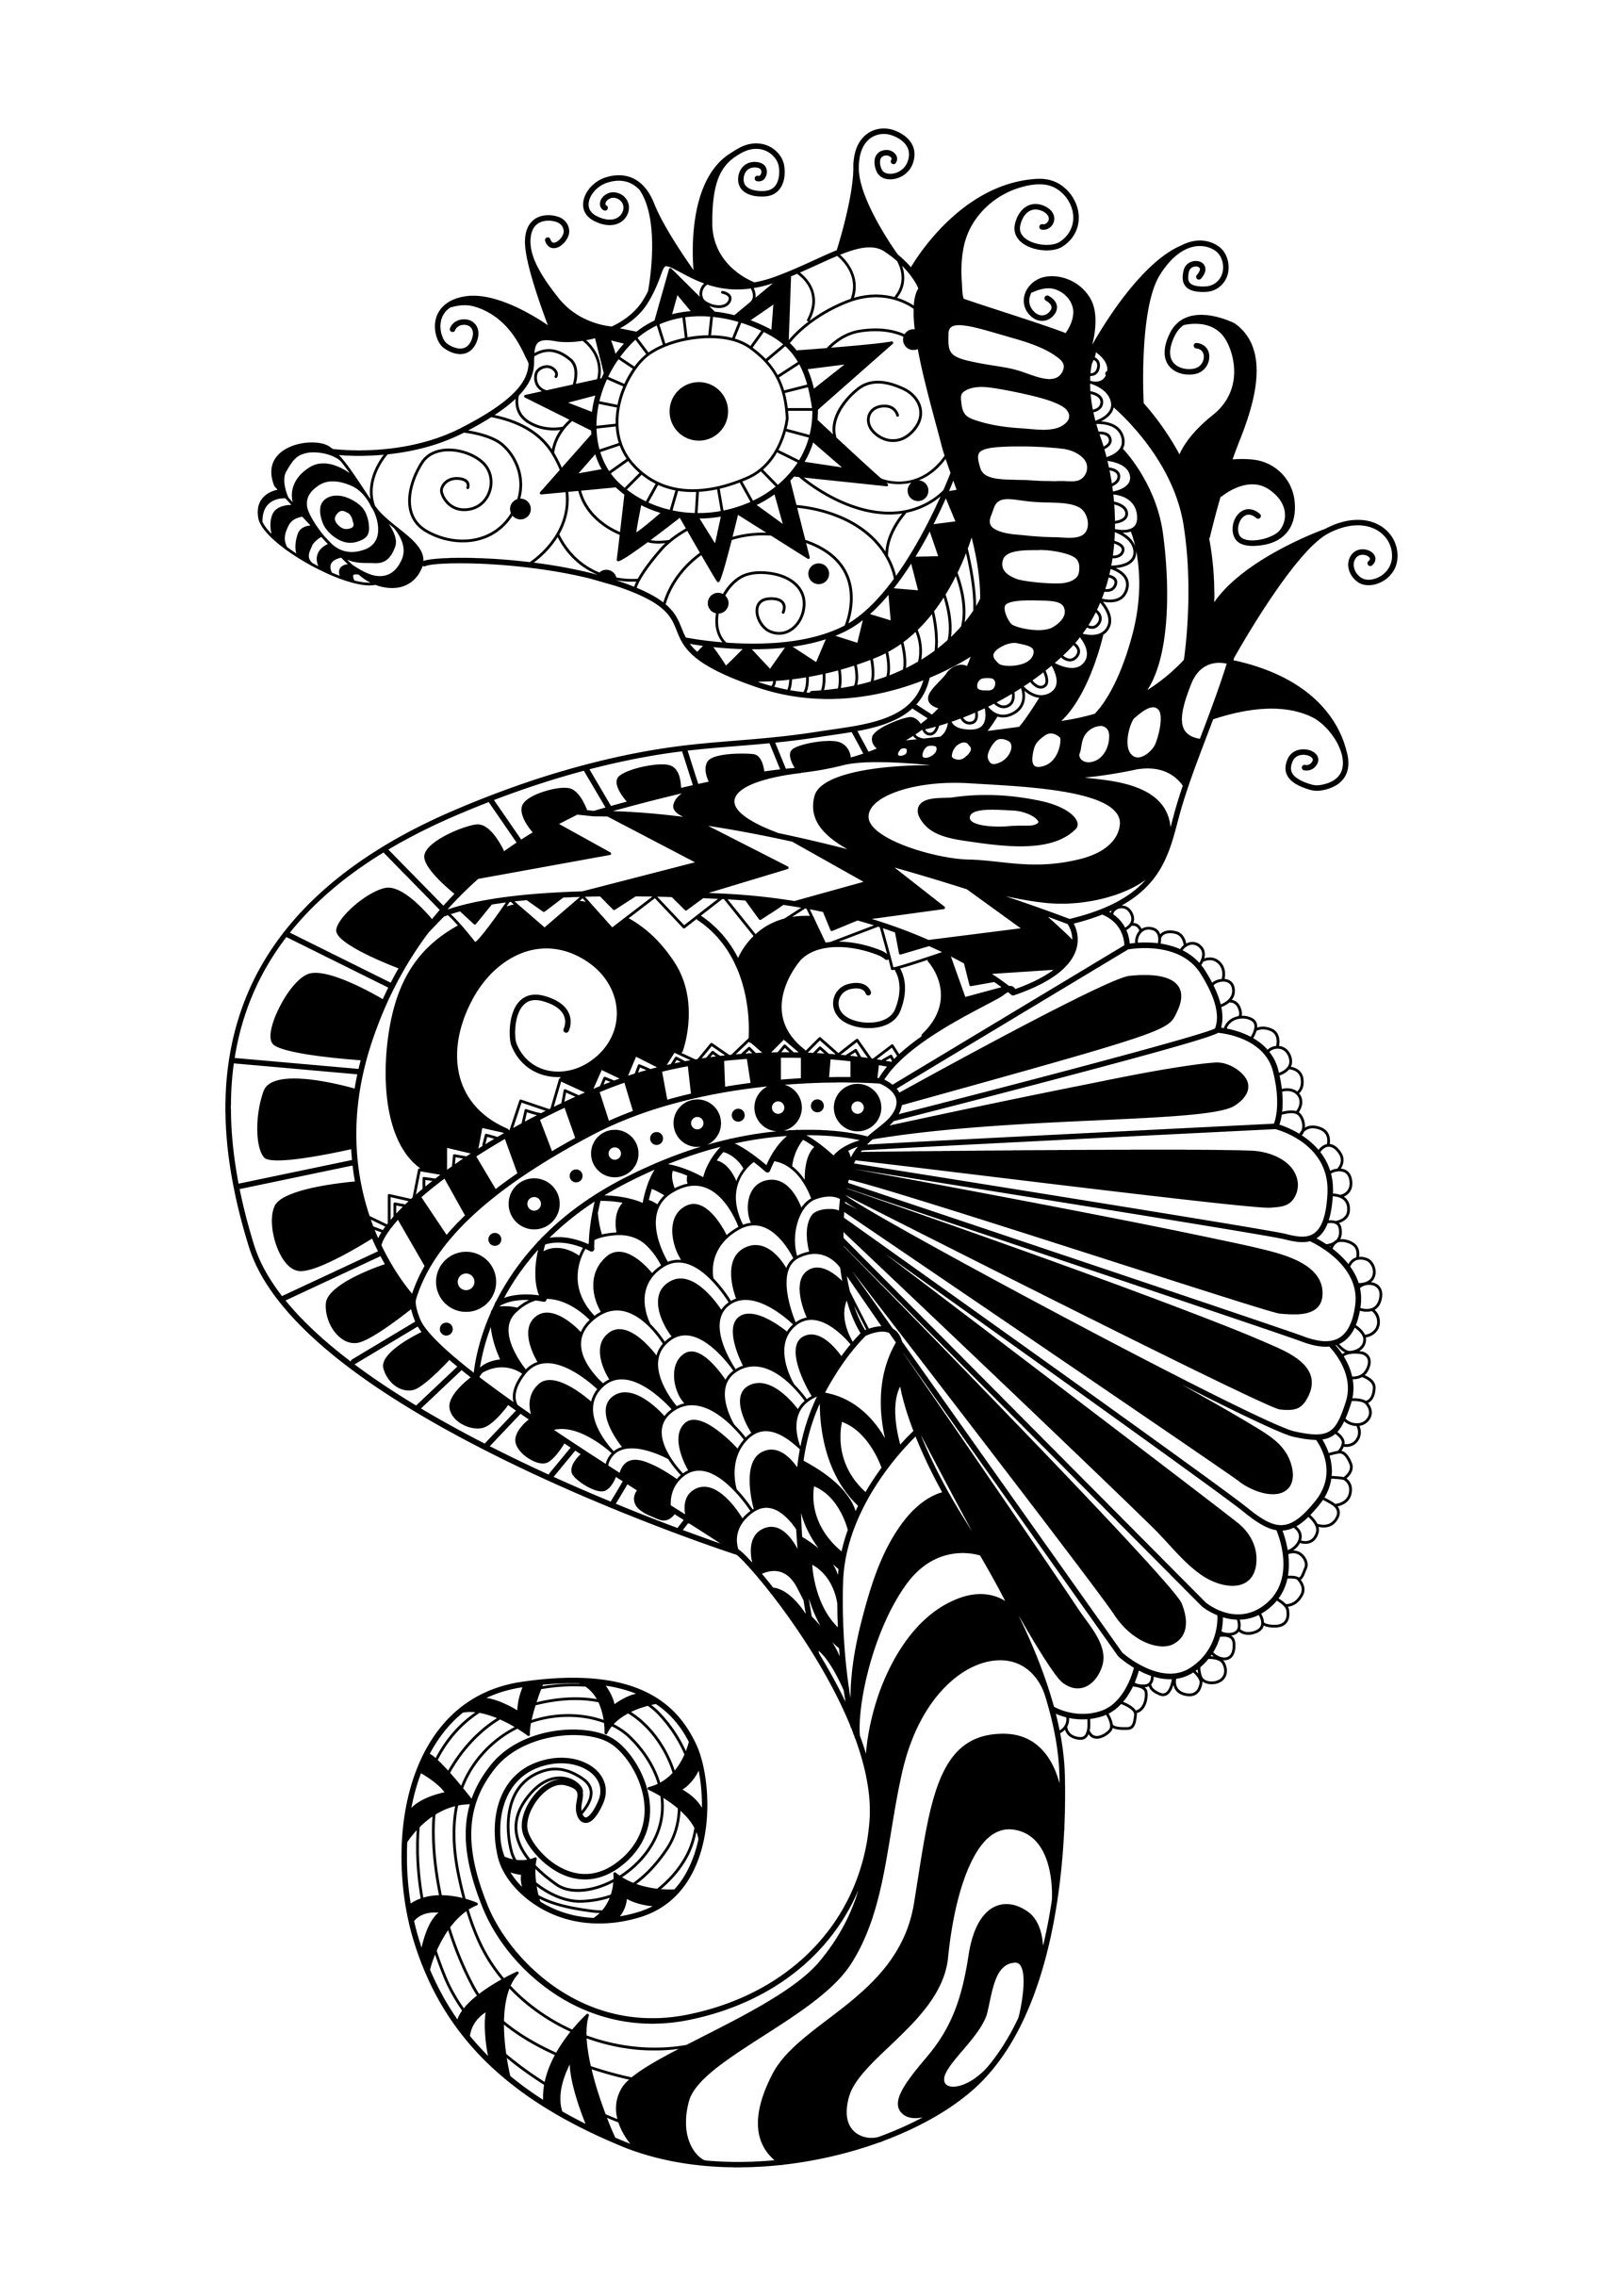 Zentangle sea horse - Zentangle Adult Coloring Pages - Page 2